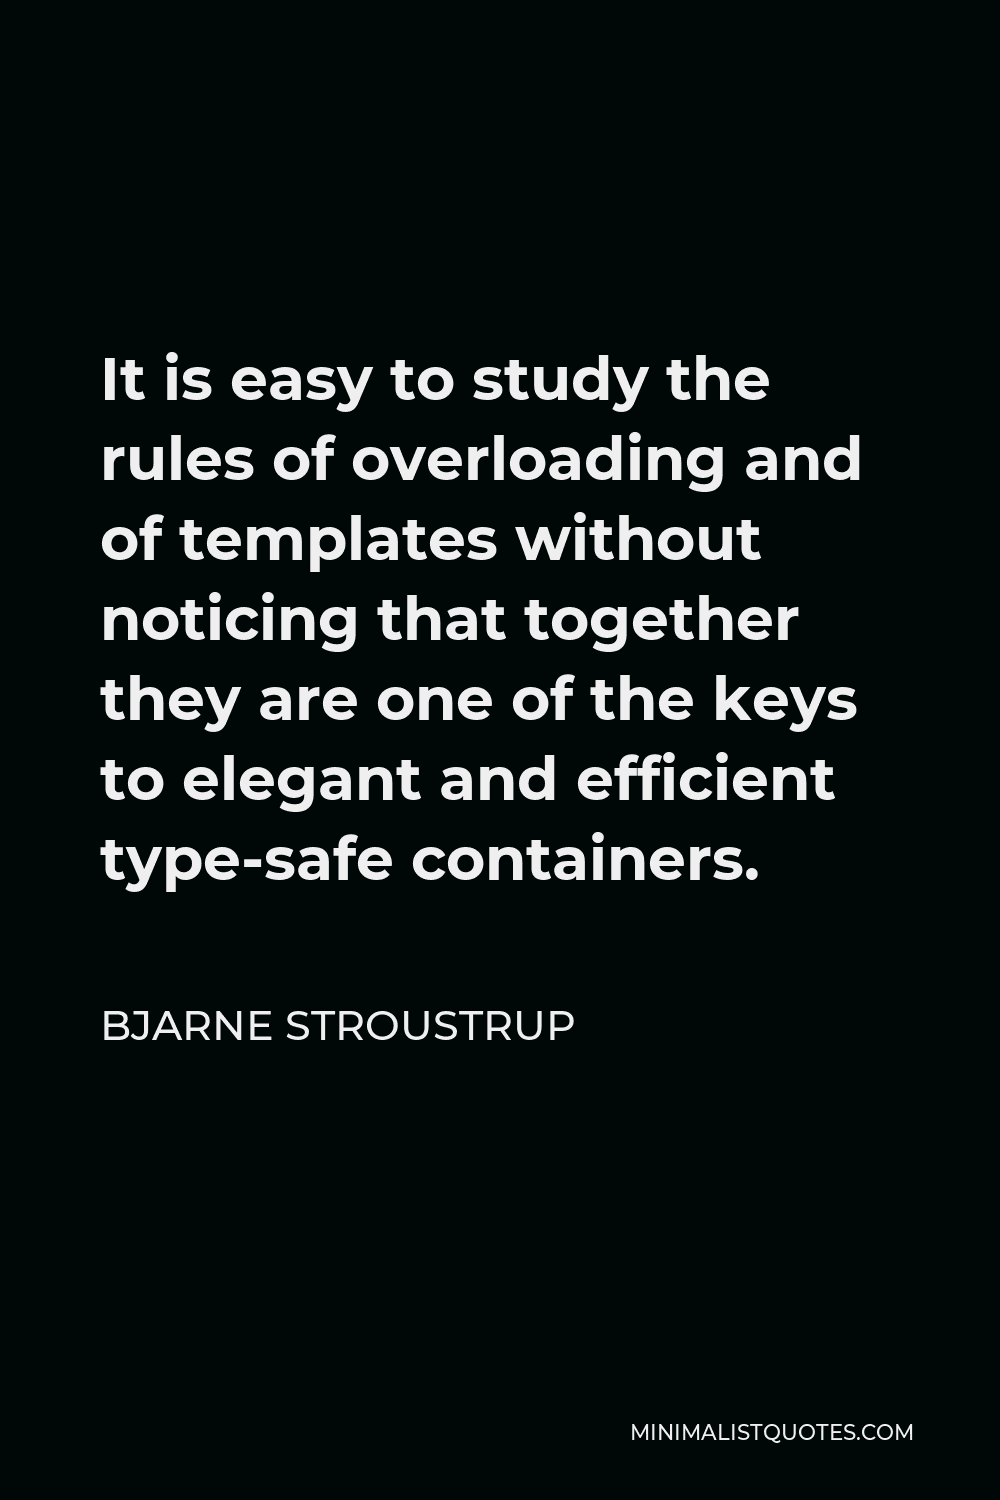 Bjarne Stroustrup Quote - It is easy to study the rules of overloading and of templates without noticing that together they are one of the keys to elegant and efficient type-safe containers.